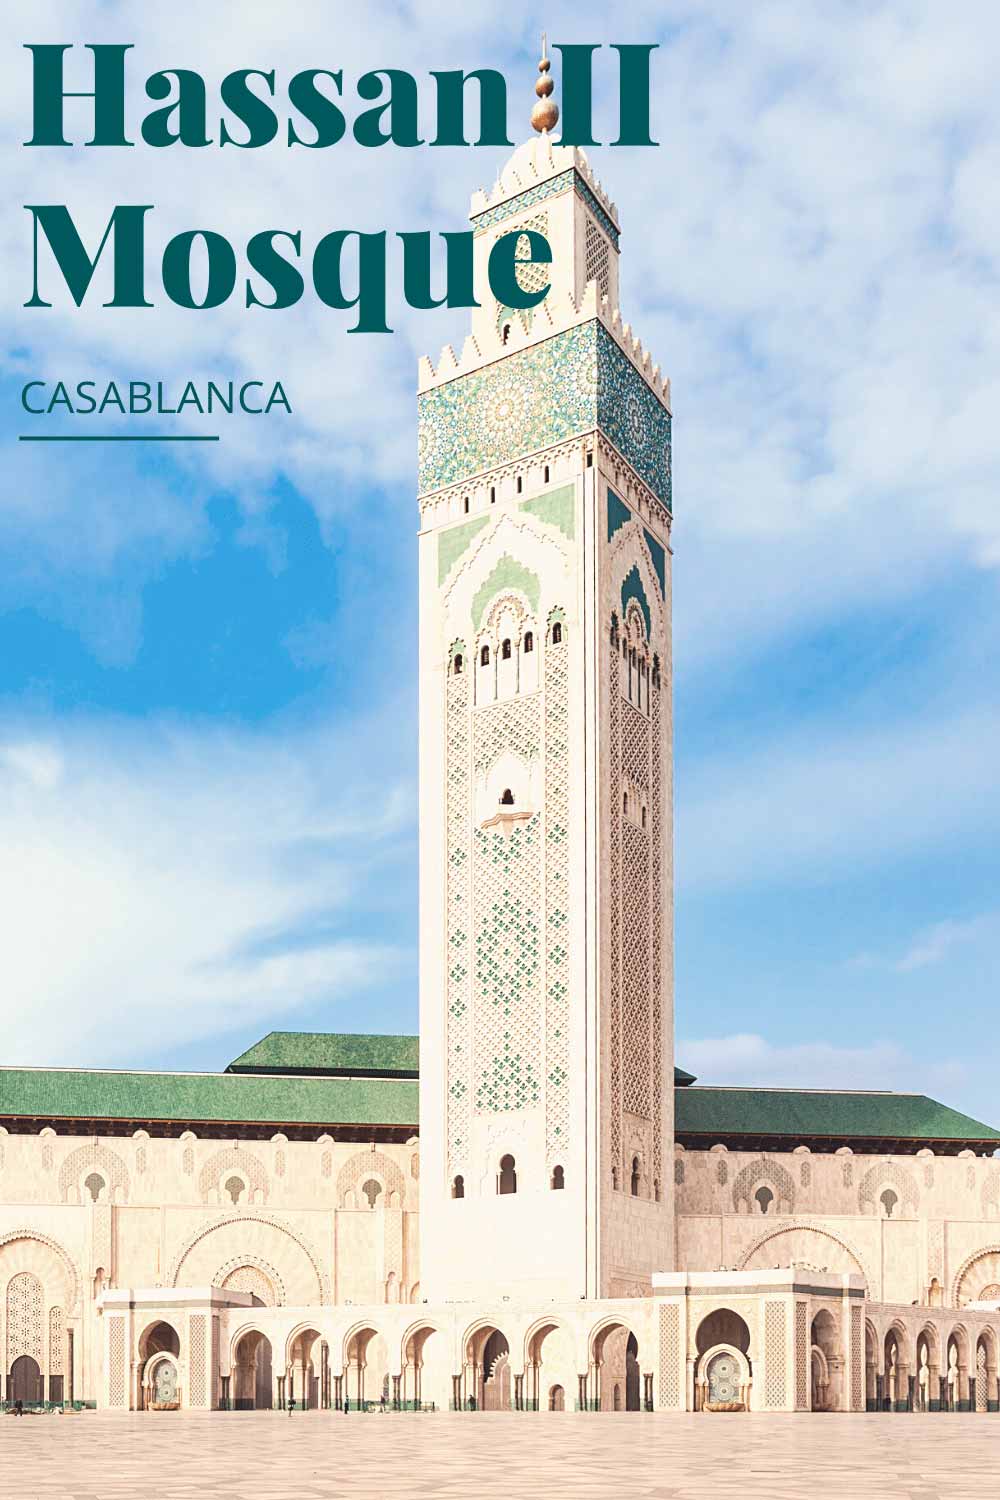 How to visit the Hassan II Mosque Casablanca